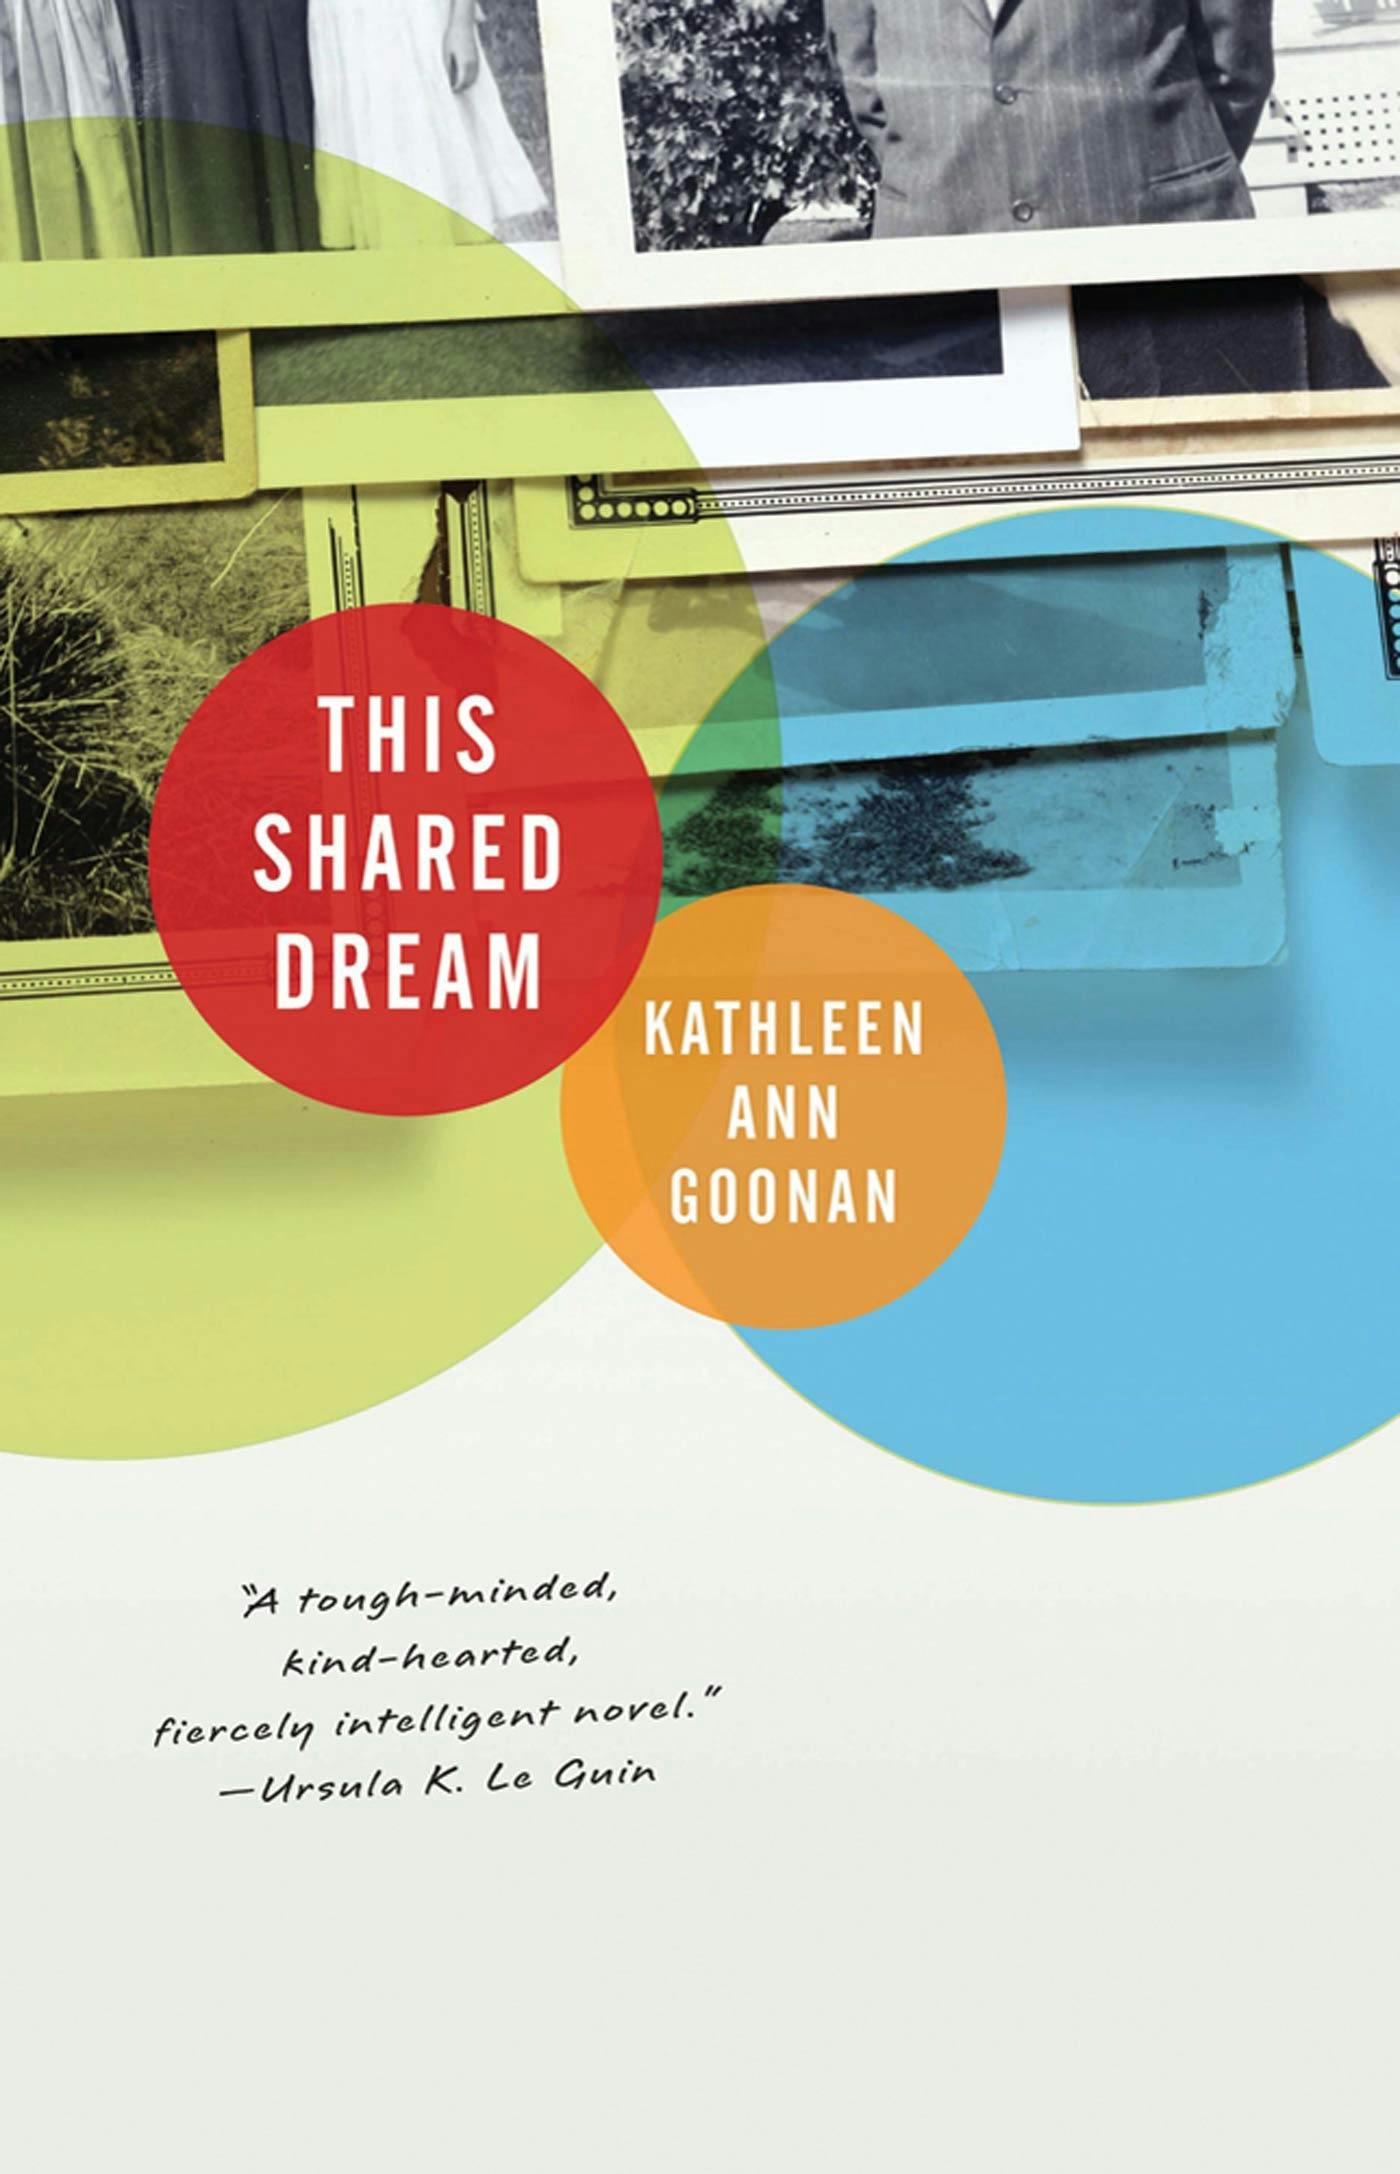 Cover for the book titled as: This Shared Dream